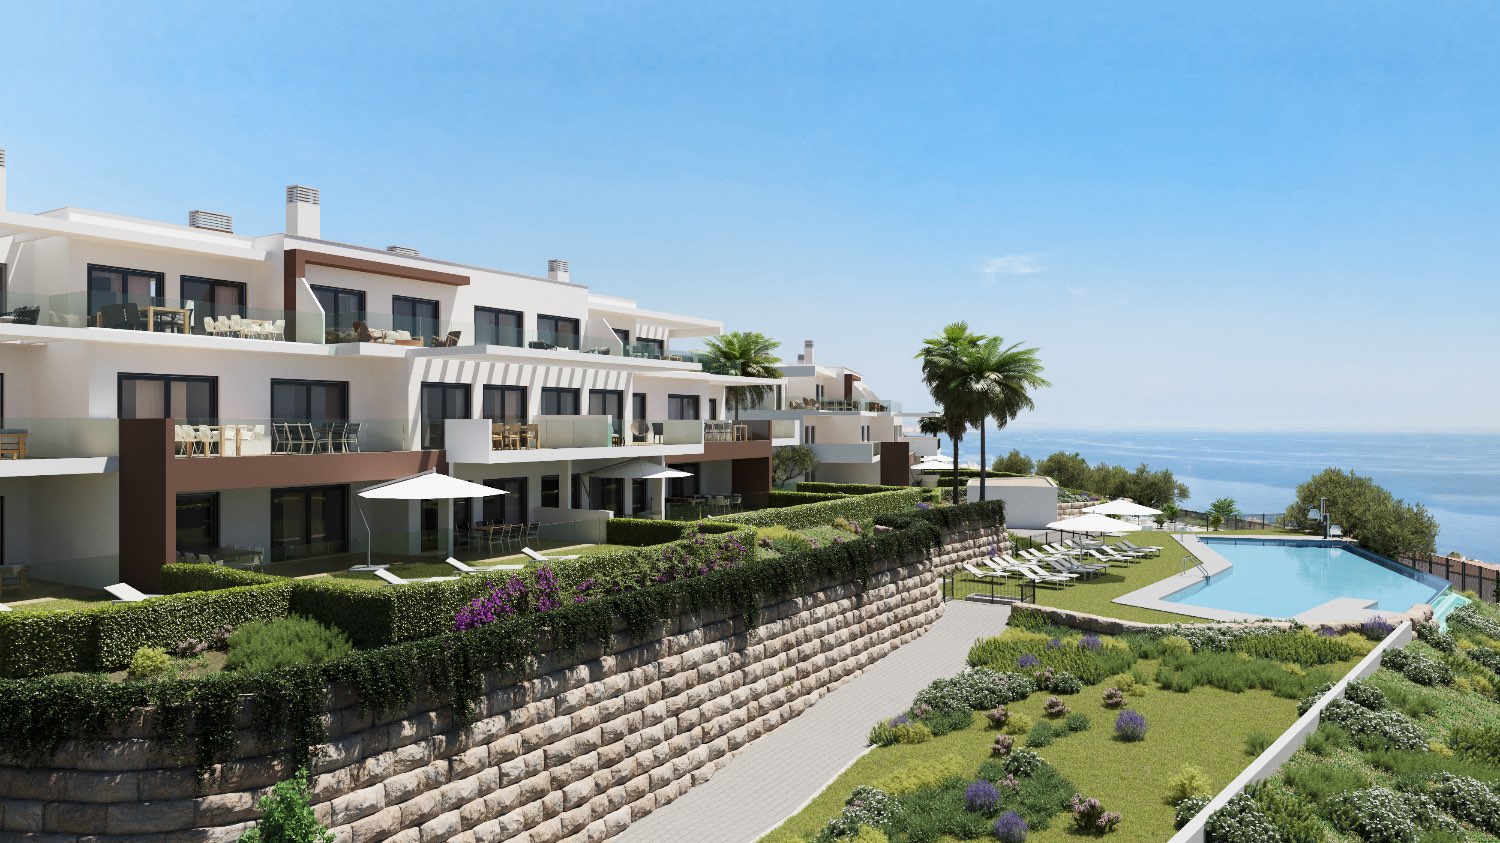 New development of luxury 2 and 3 bedroom apartments in Casares